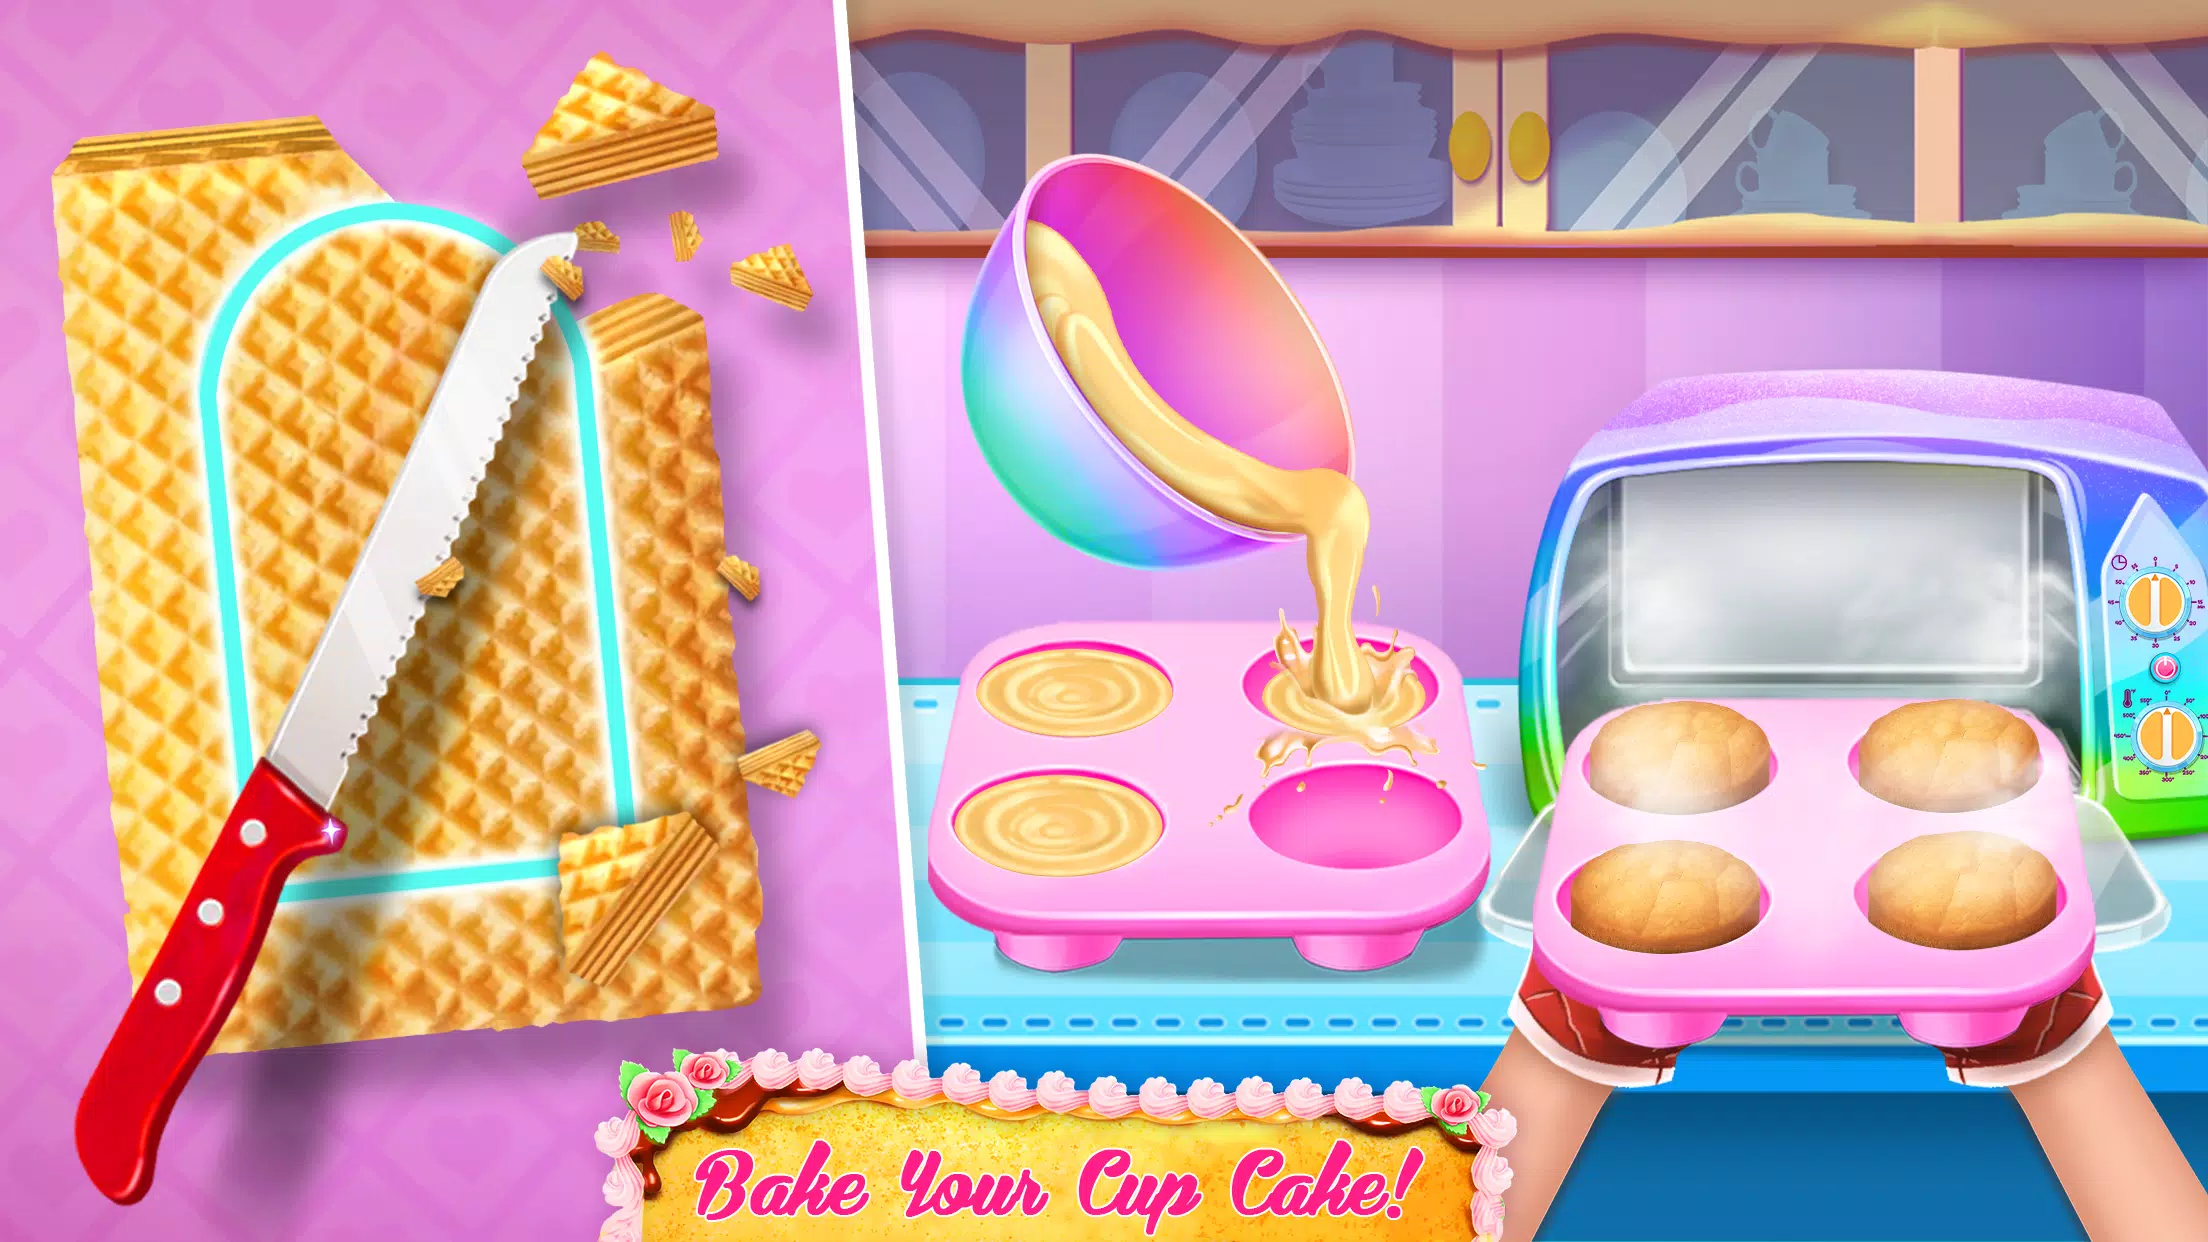 Shoe Cake Maker - Cooking game Game for Android - Download